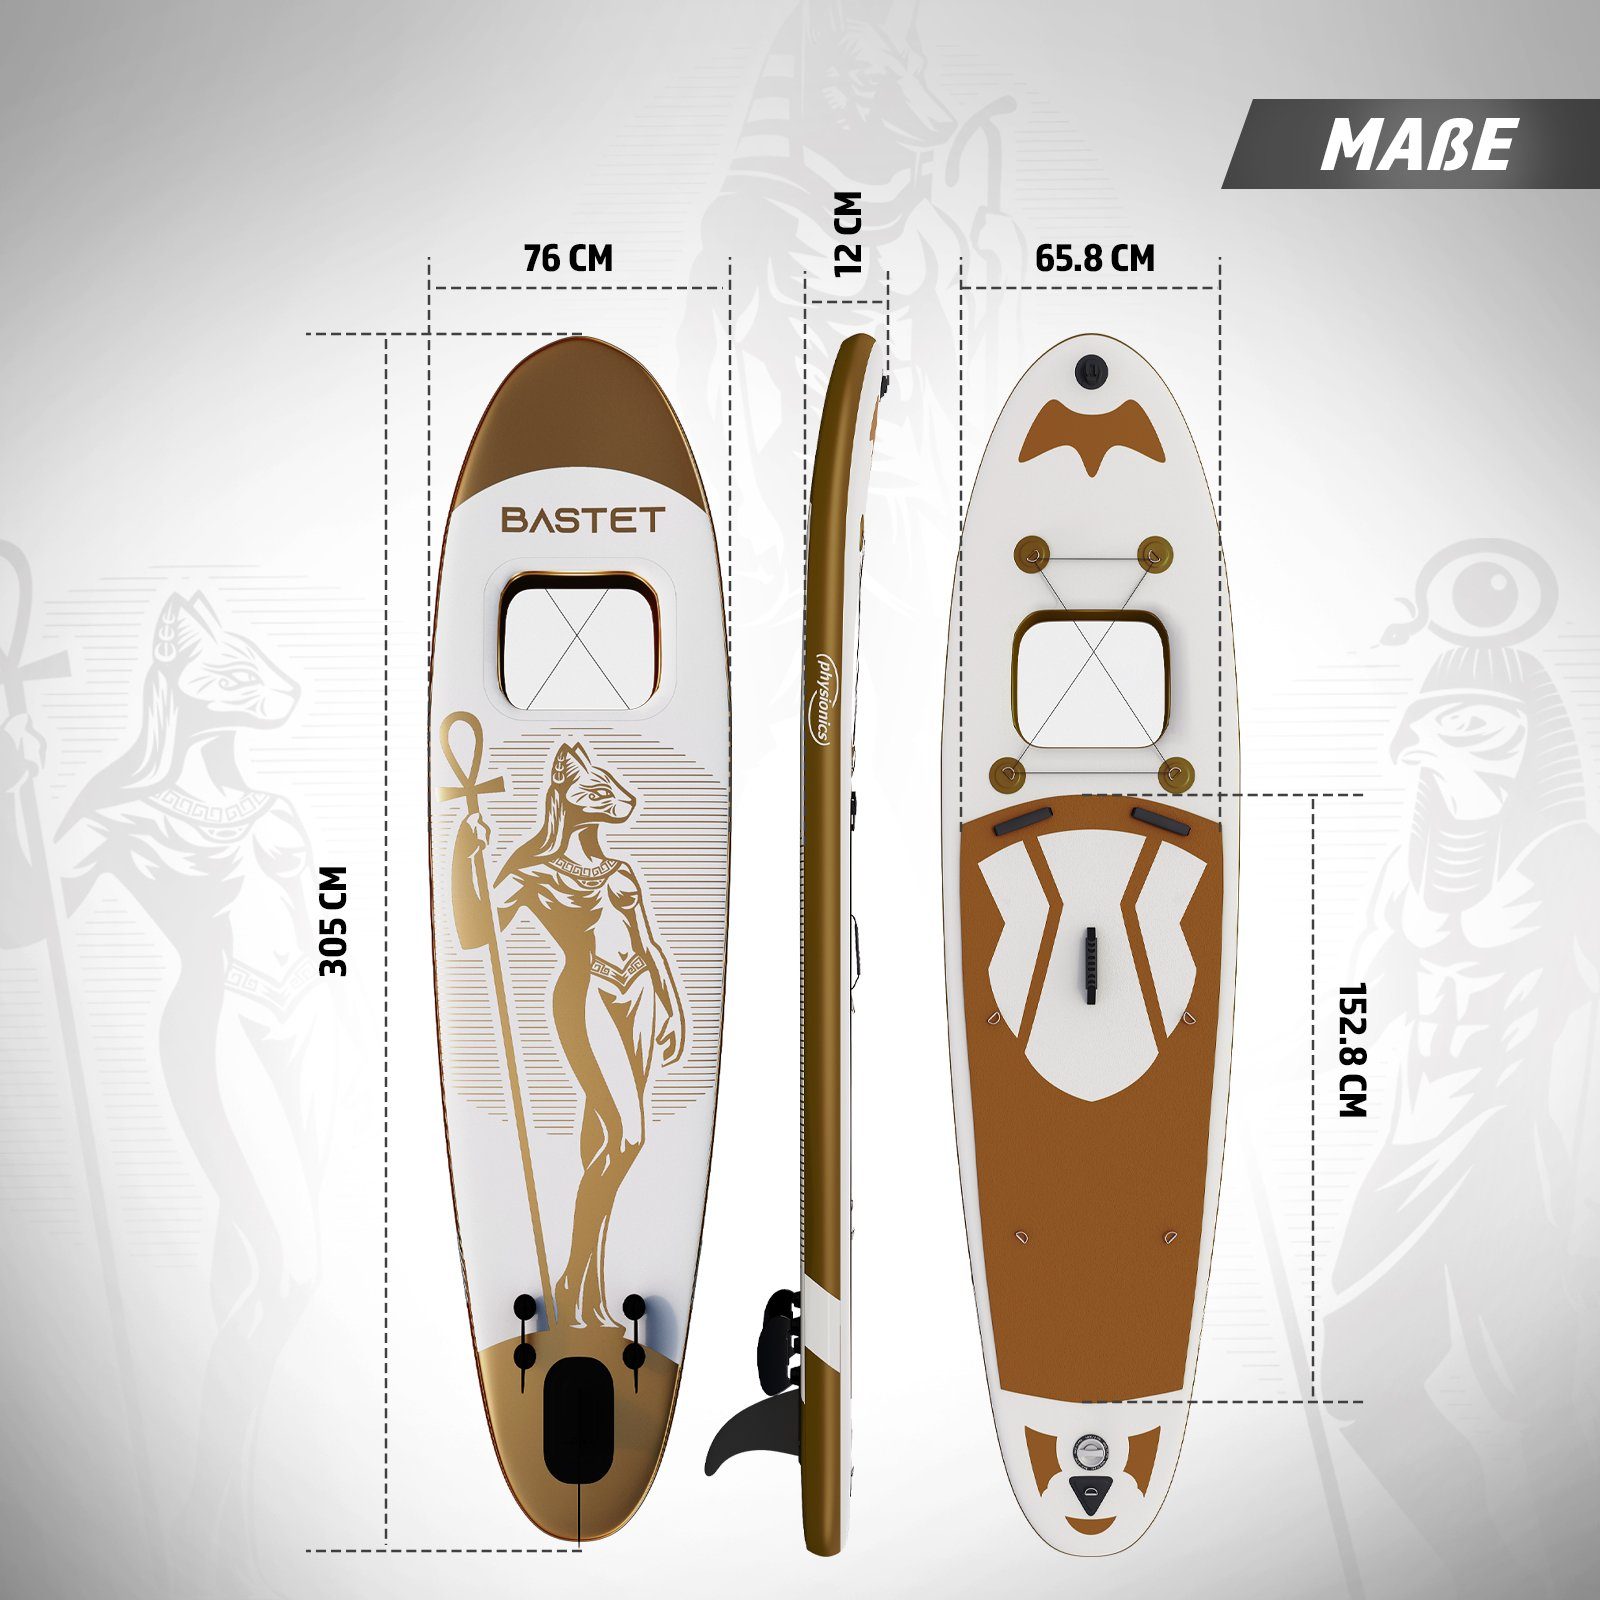 305cm Board Aufblasbares Paddle SUP SUP-Board Board Physionics Up Bastet(Gold) Stand